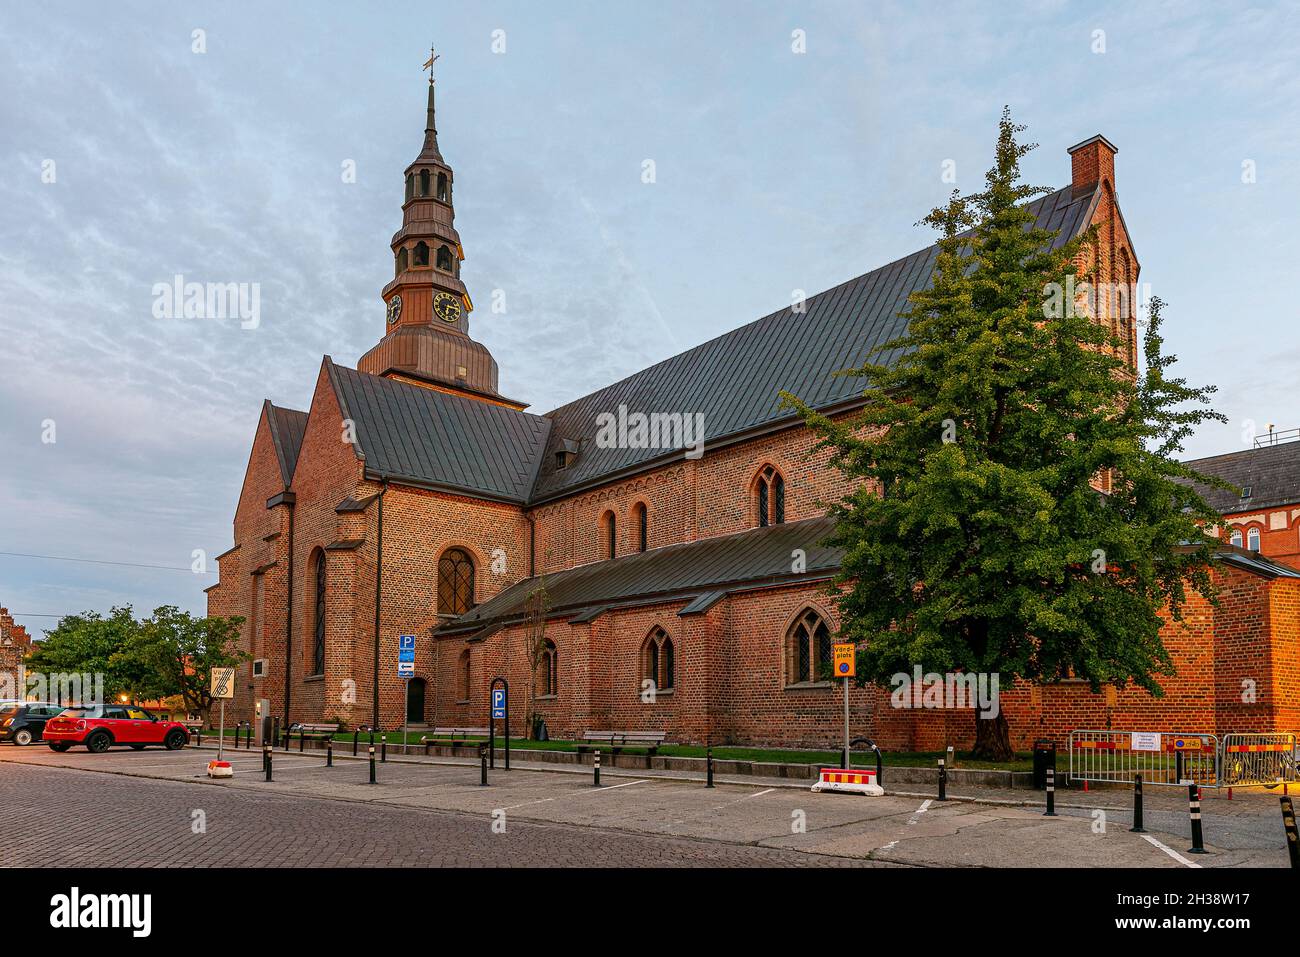 the gothic Abbey church of St. Peter in red bricks, Ystad, Sweden, September 14, 2021 Stock Photo